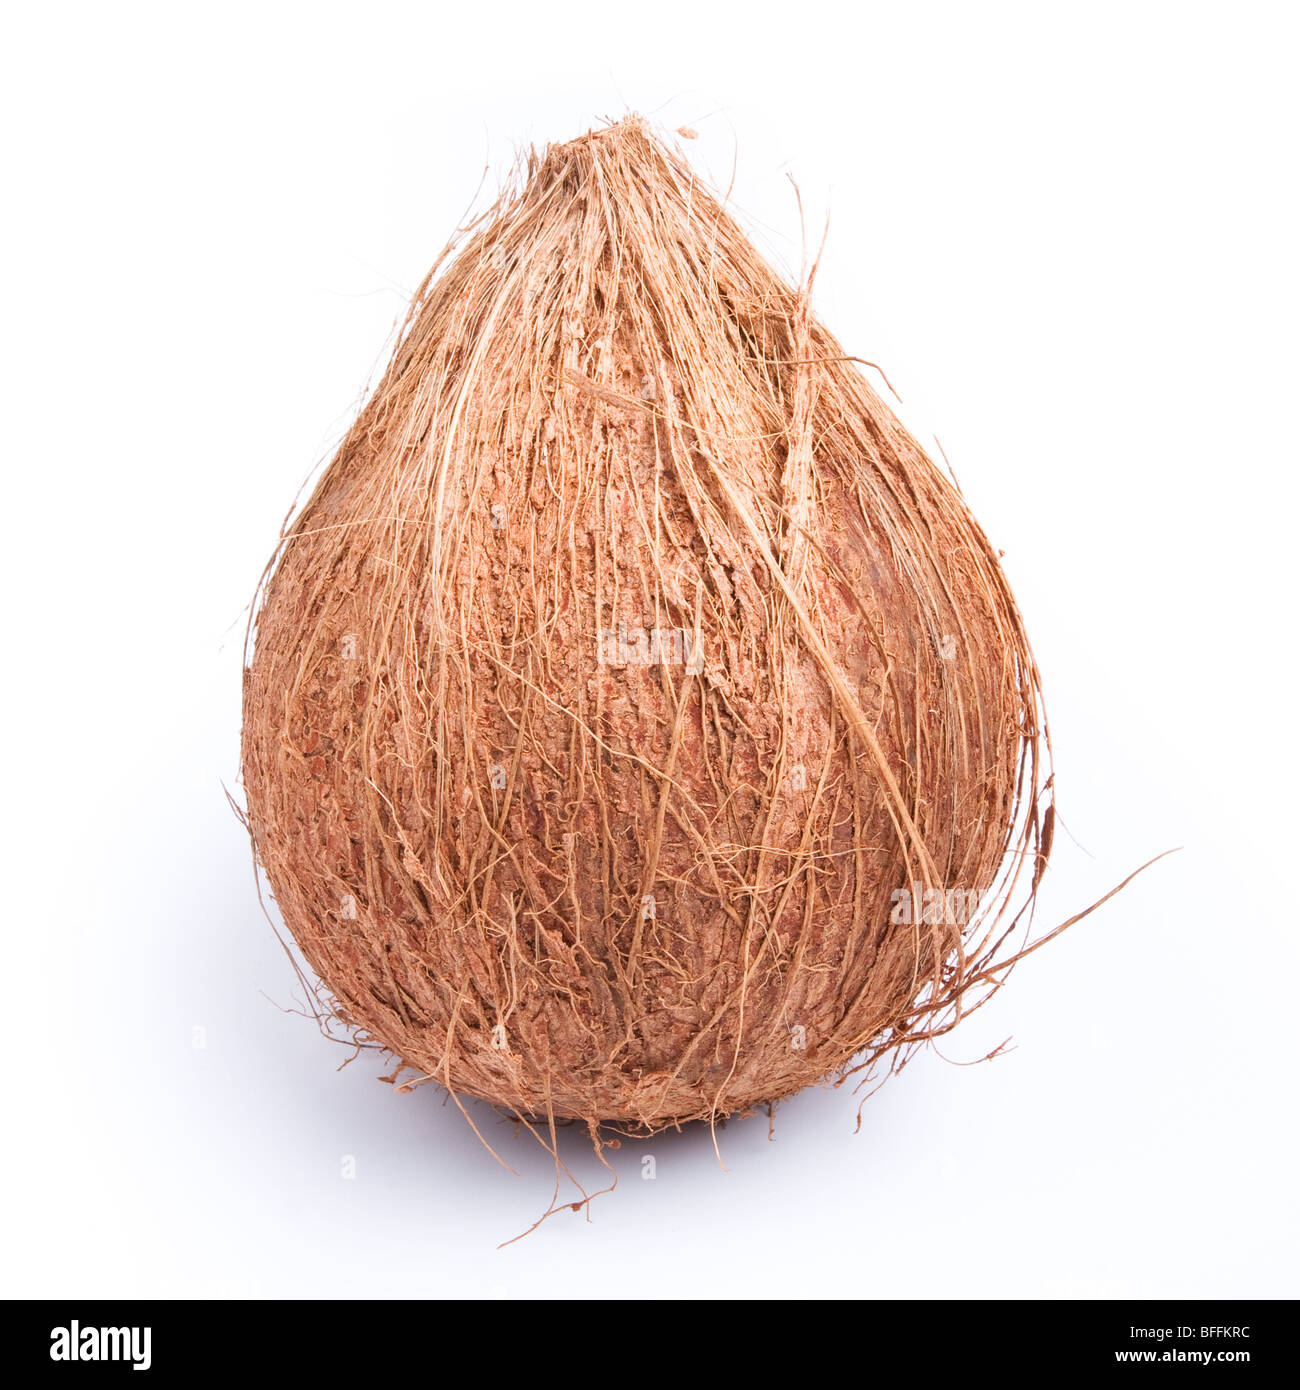 Whole hairy brown coconut isolated against white background. Stock Photo